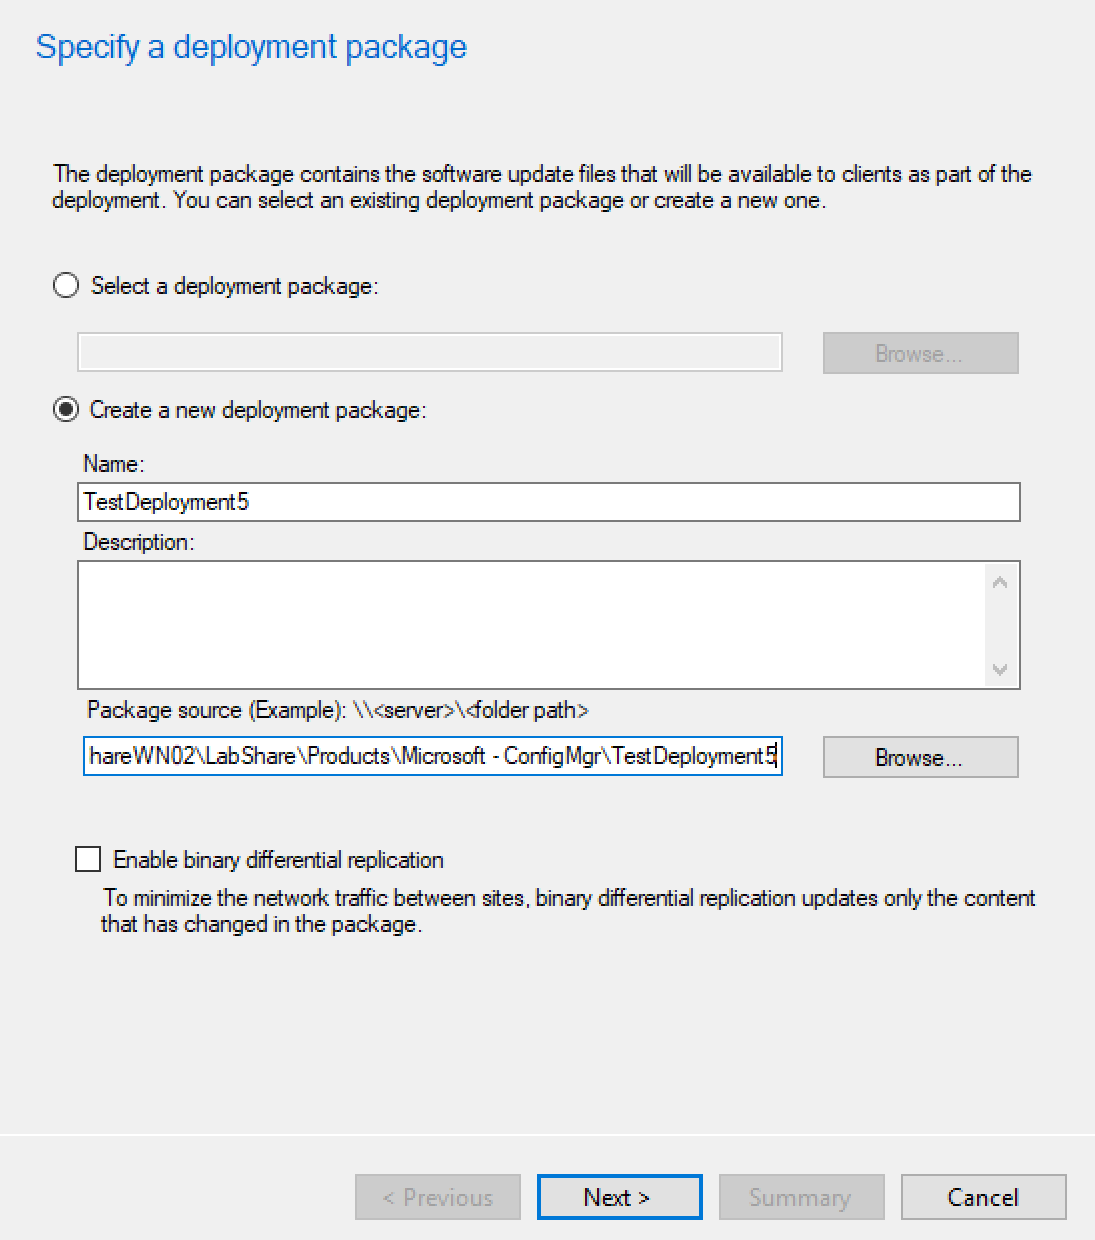 This is a screenshot of how to create a new deployment package with Microsoft Endpoint Configuration Manager.